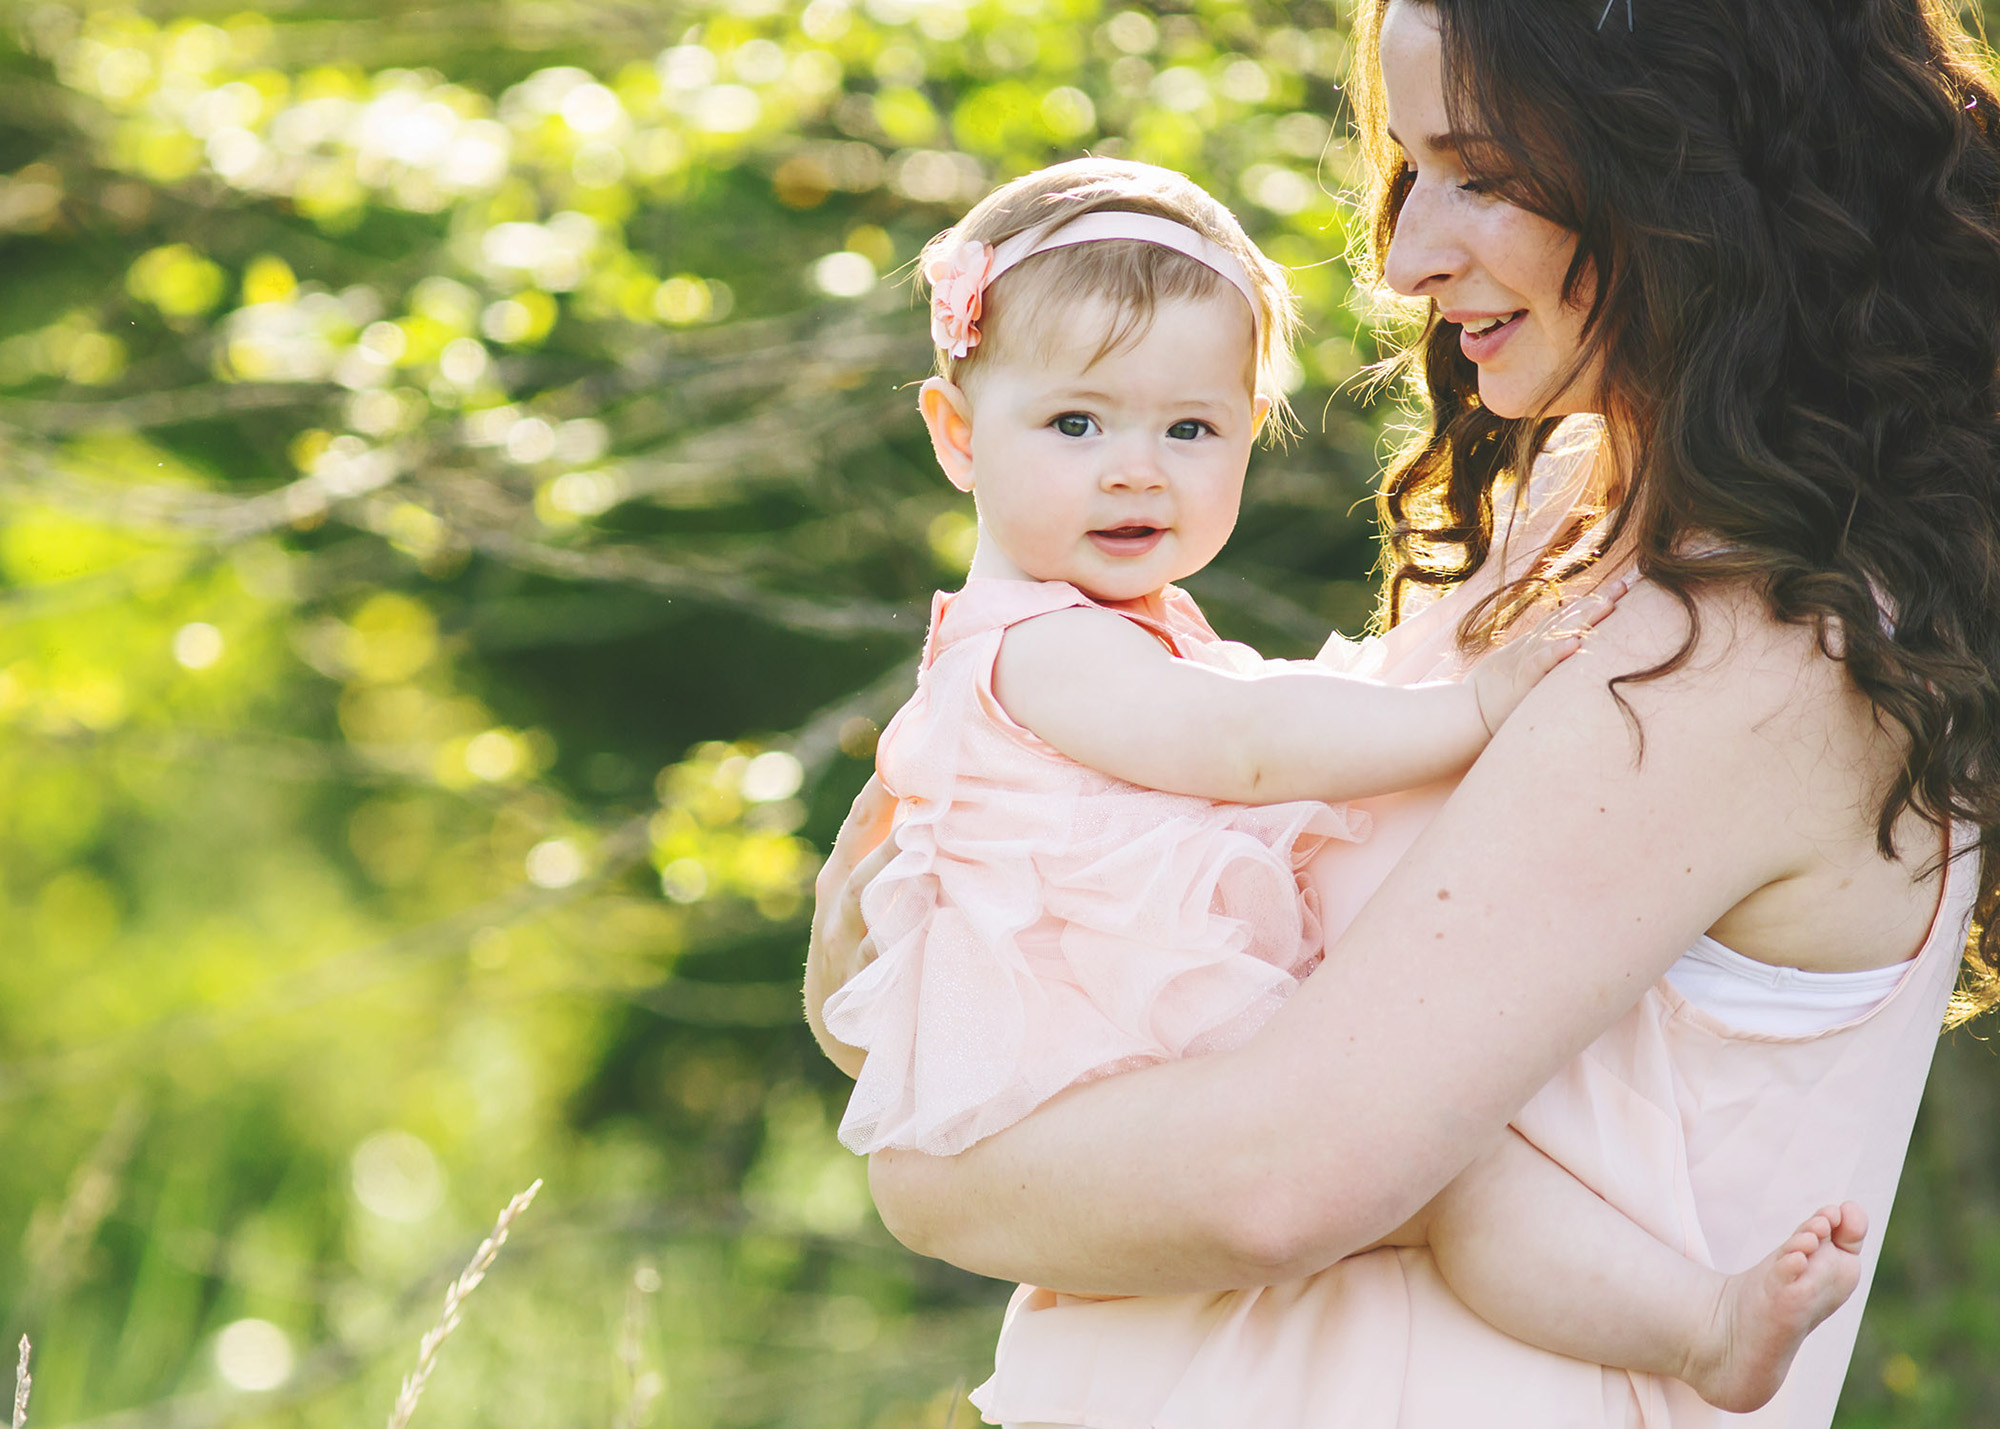 Campbell River Photographer Family Photographs